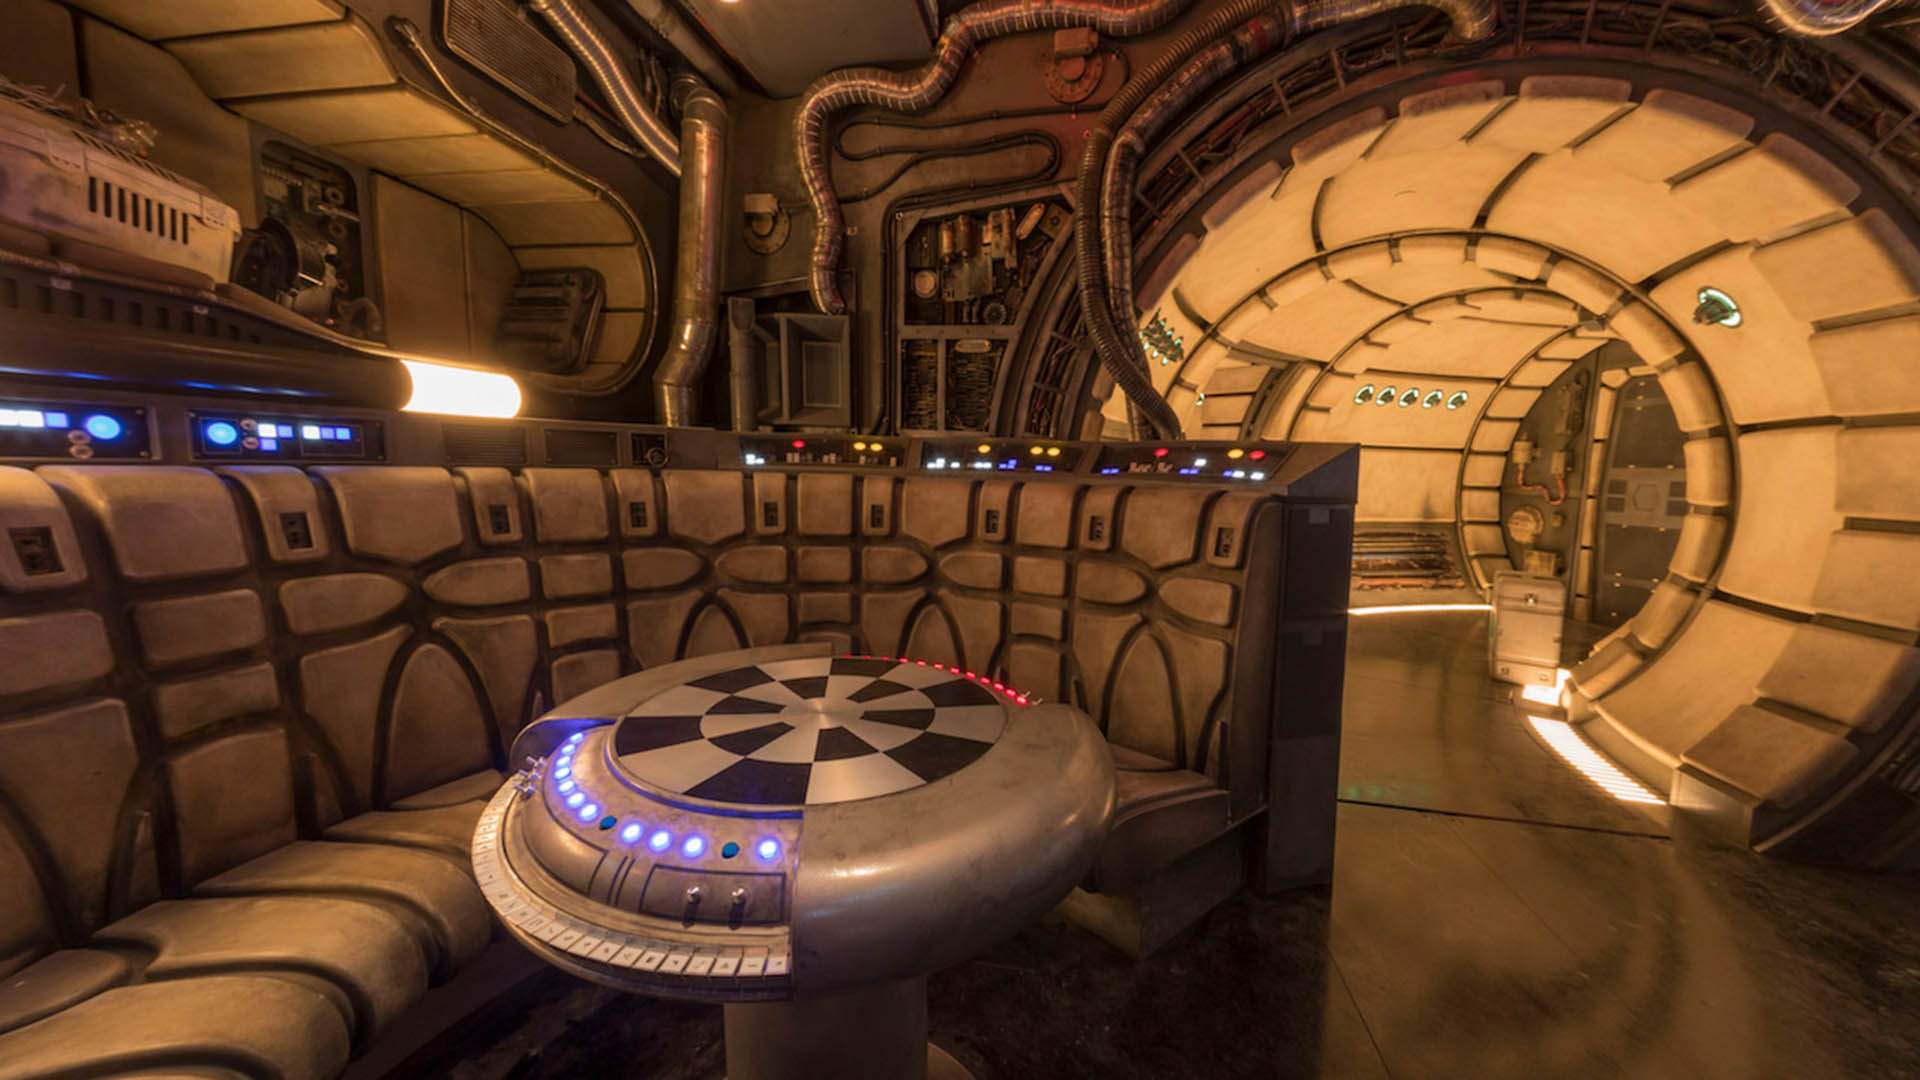 You Can Now Head to a Galaxy Far, Far Away at Disney's First 'Star Wars' Theme Park Zone